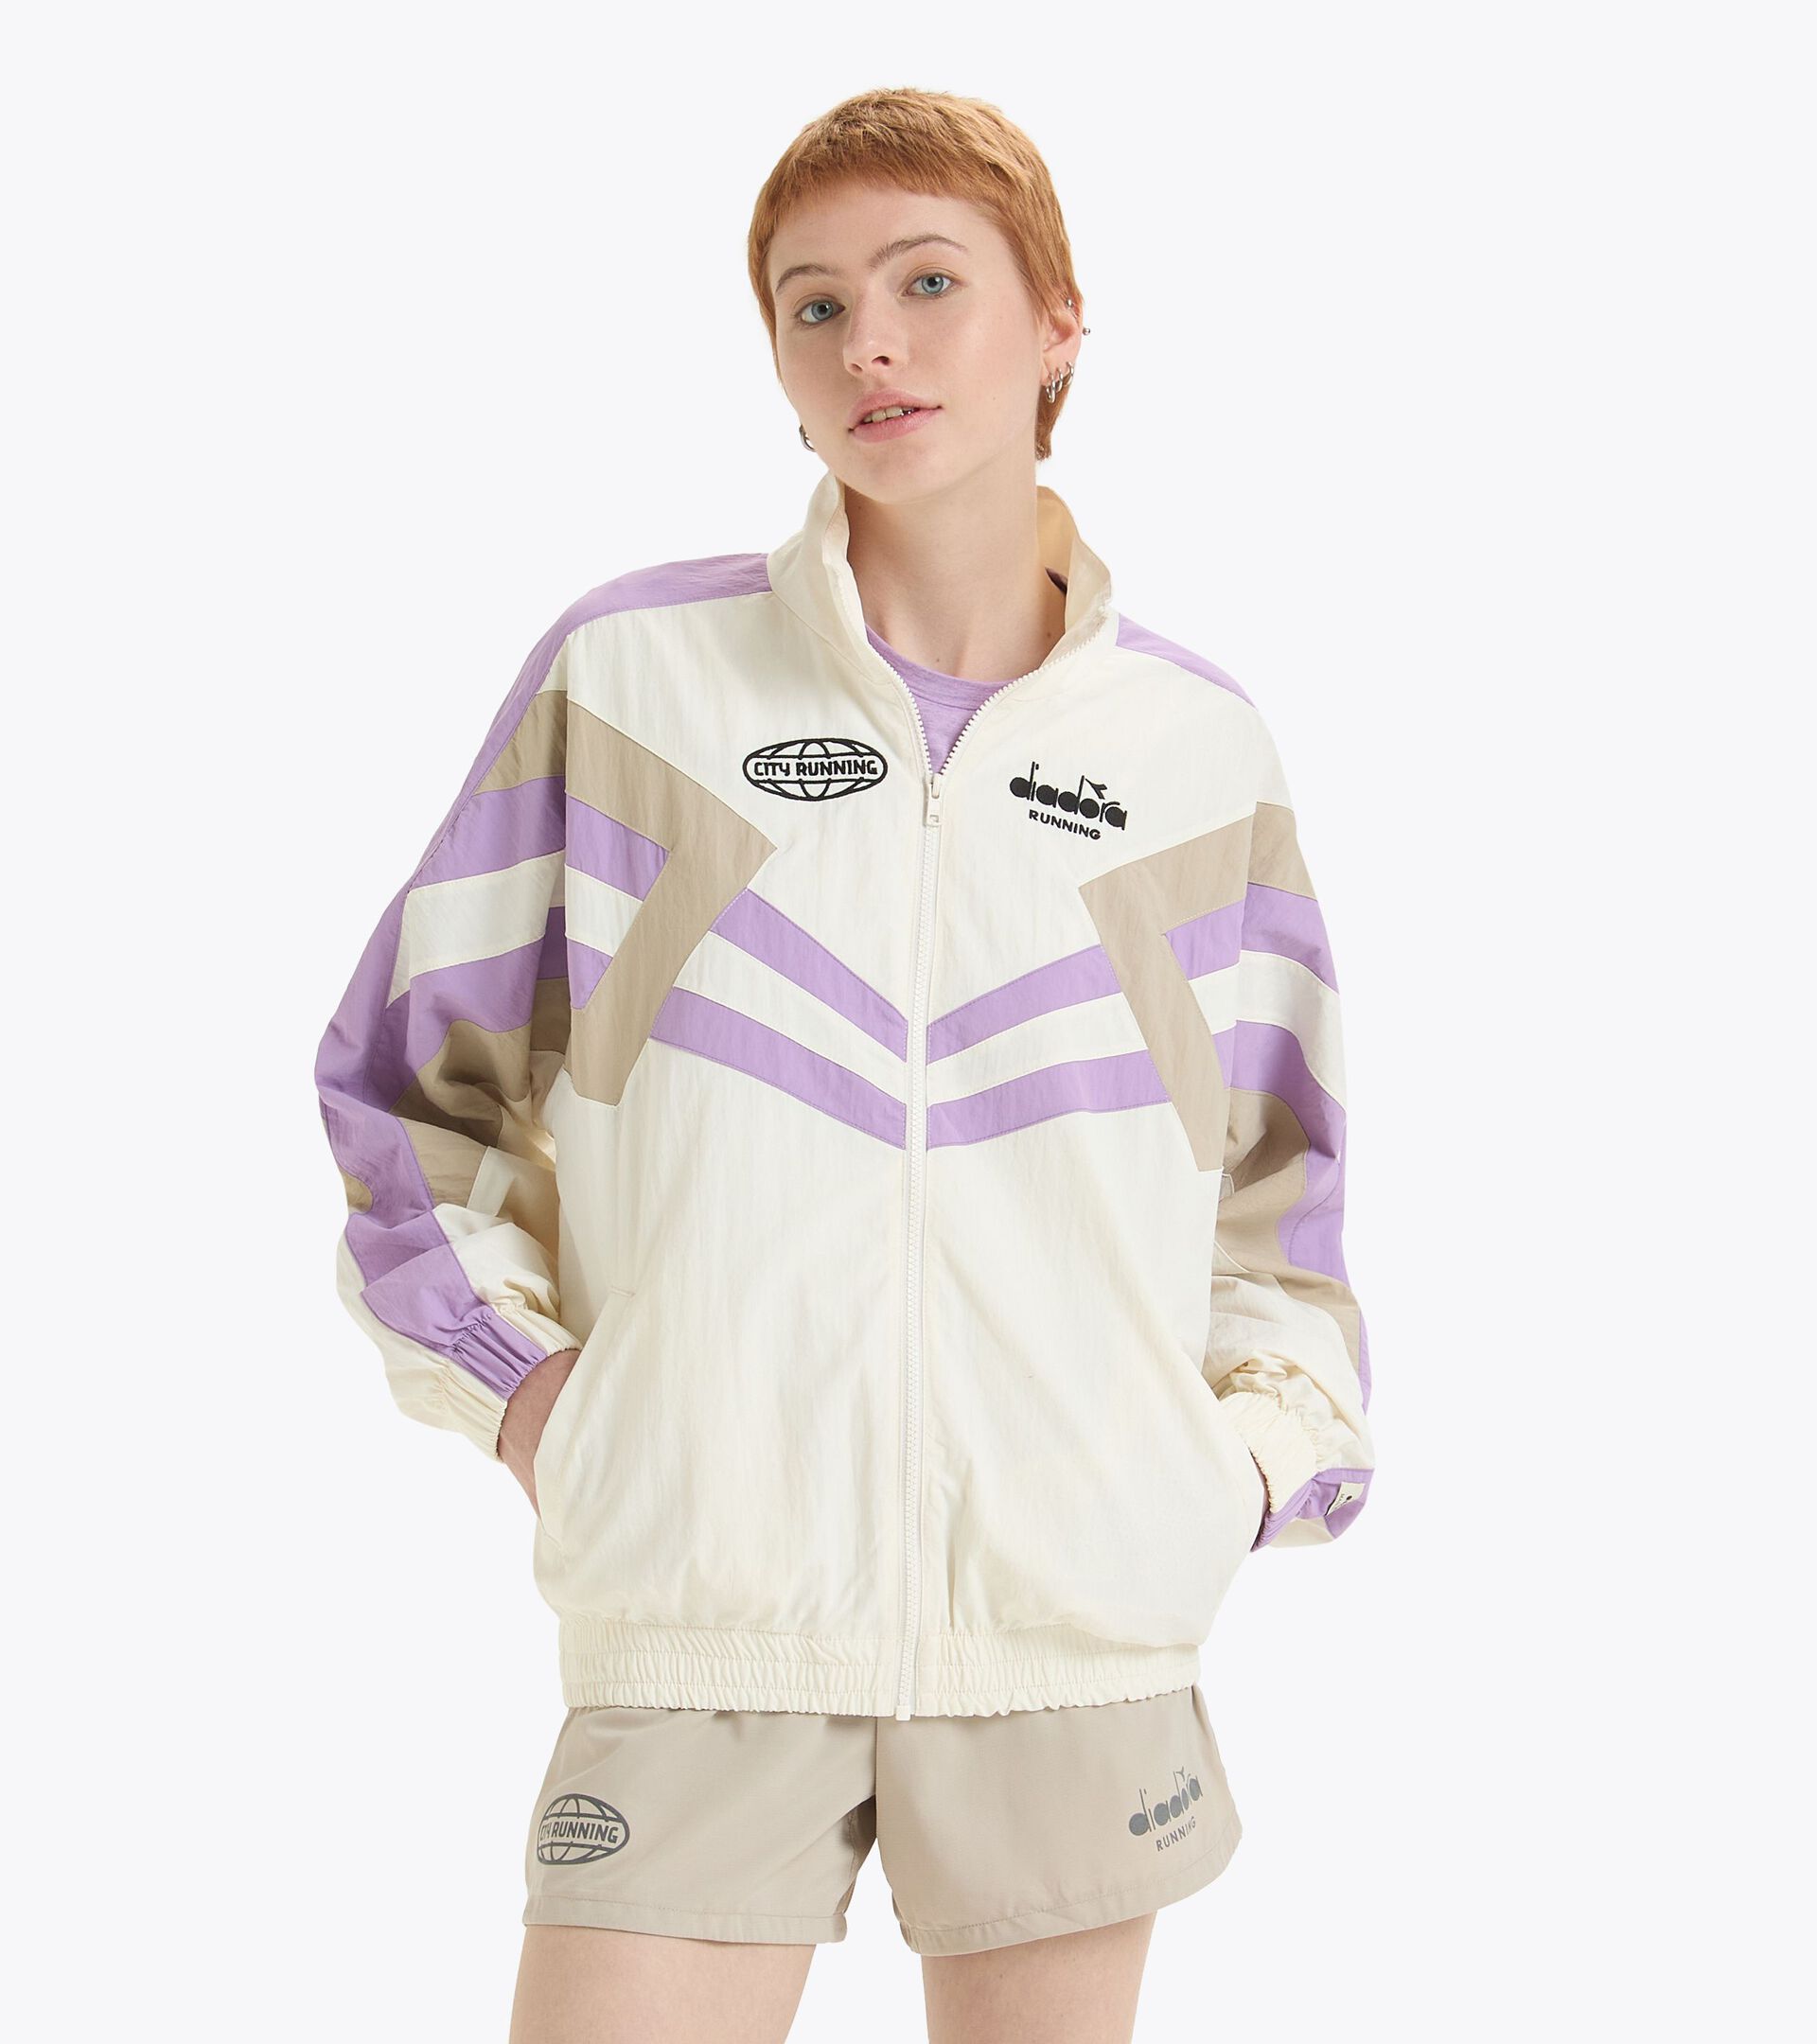 Track Jacket - made in Italy - genderneutral TRACK JACKET MILL CITY WISPERN WEISS - Diadora